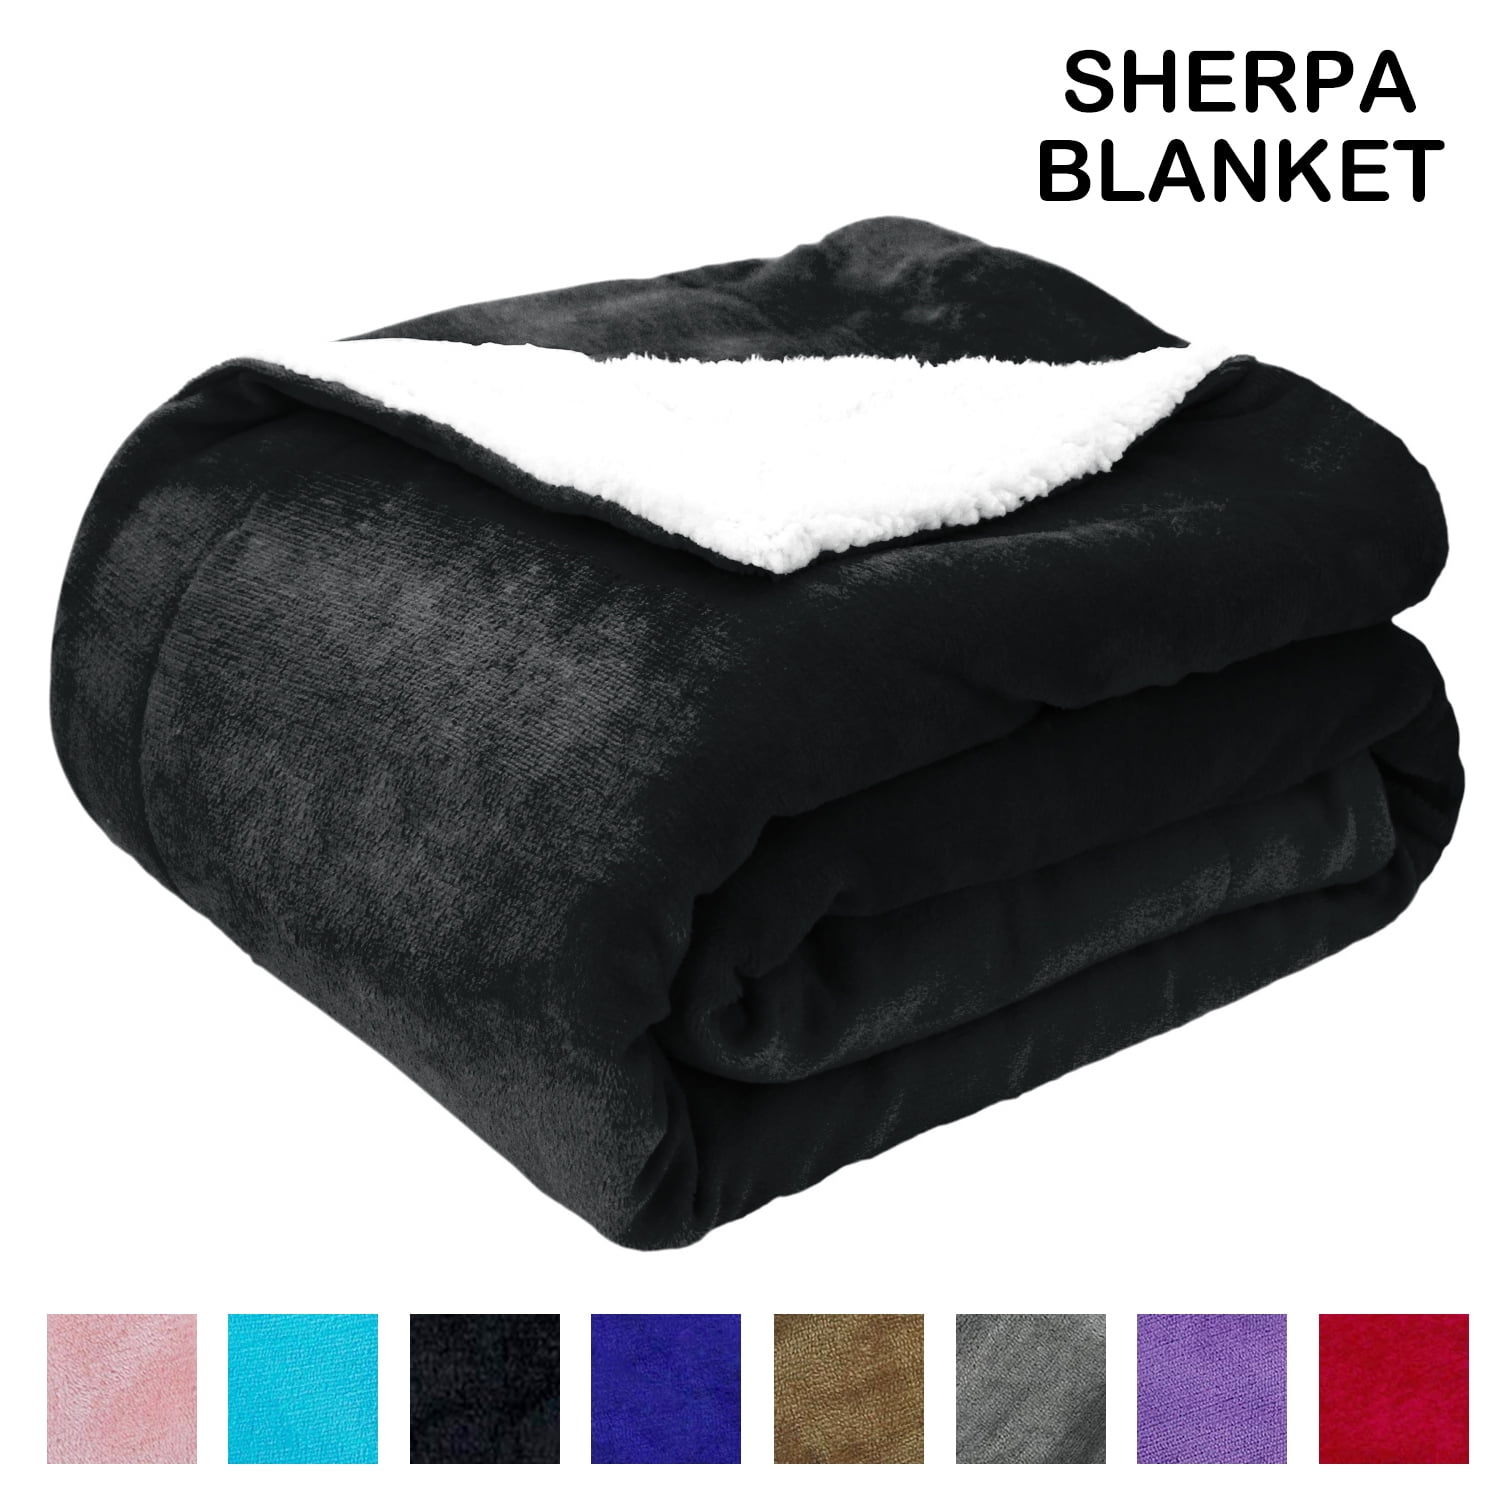 Utopia Bedding Sherpa Blanket Queen Size [Black, 90x90 Inches] - 480GSM  Thick Warm Plush Fleece Reversible Blanket for Bed, Sofa, Couch, Camping  and